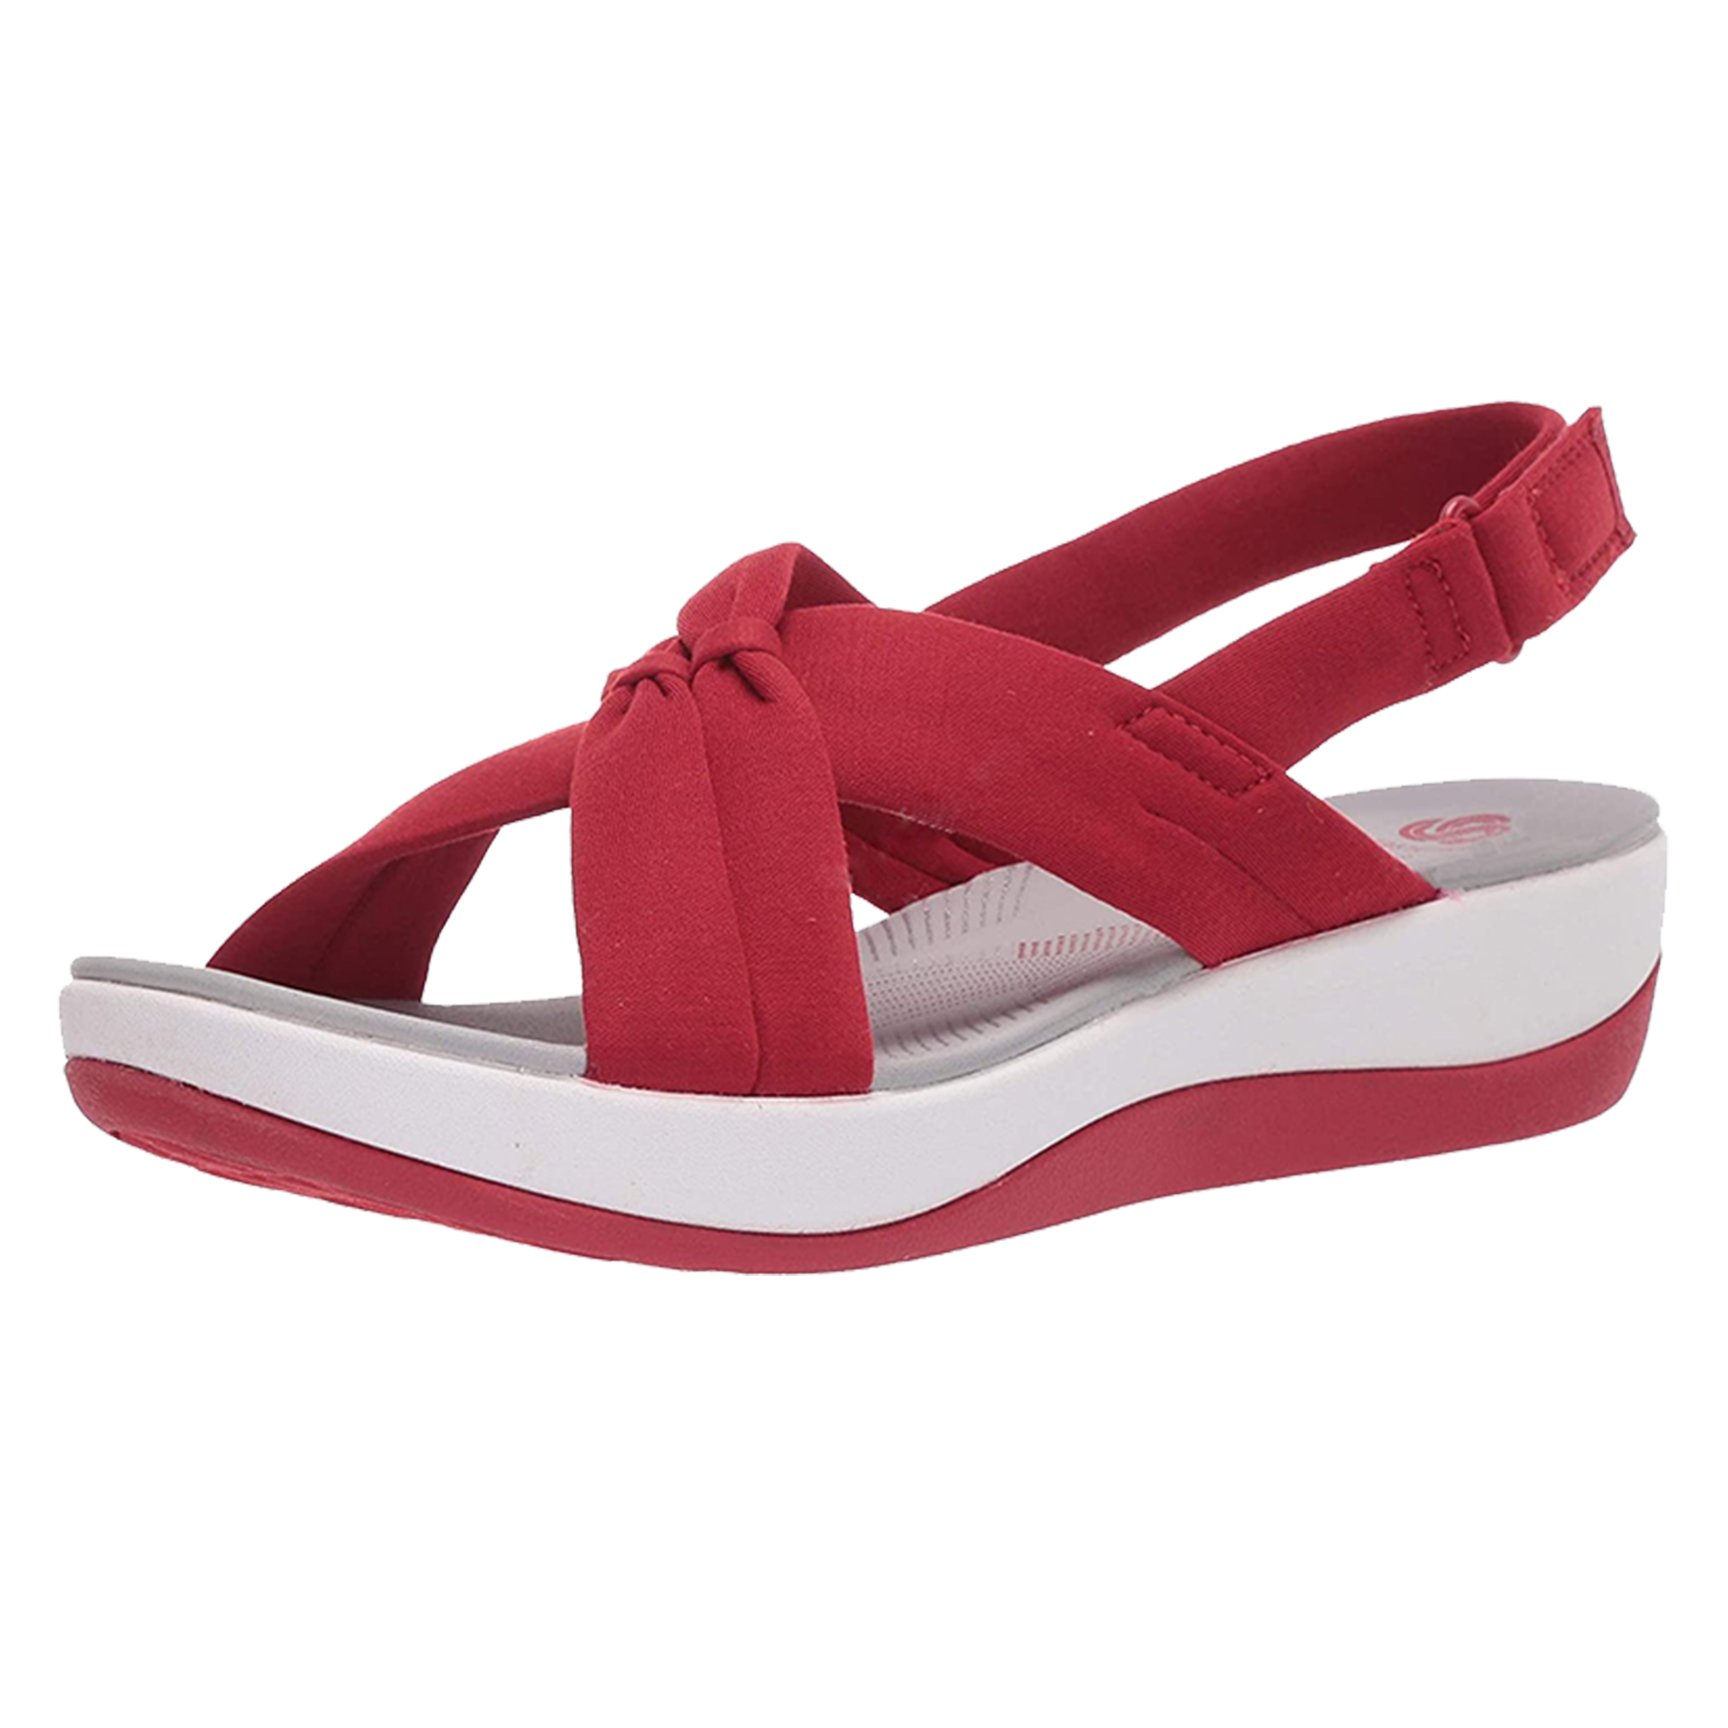 [Clearance Sale 49% OFF] - Women's Dr.Care Orthopedic Arch Support Reduces Pain Comfy Sandal